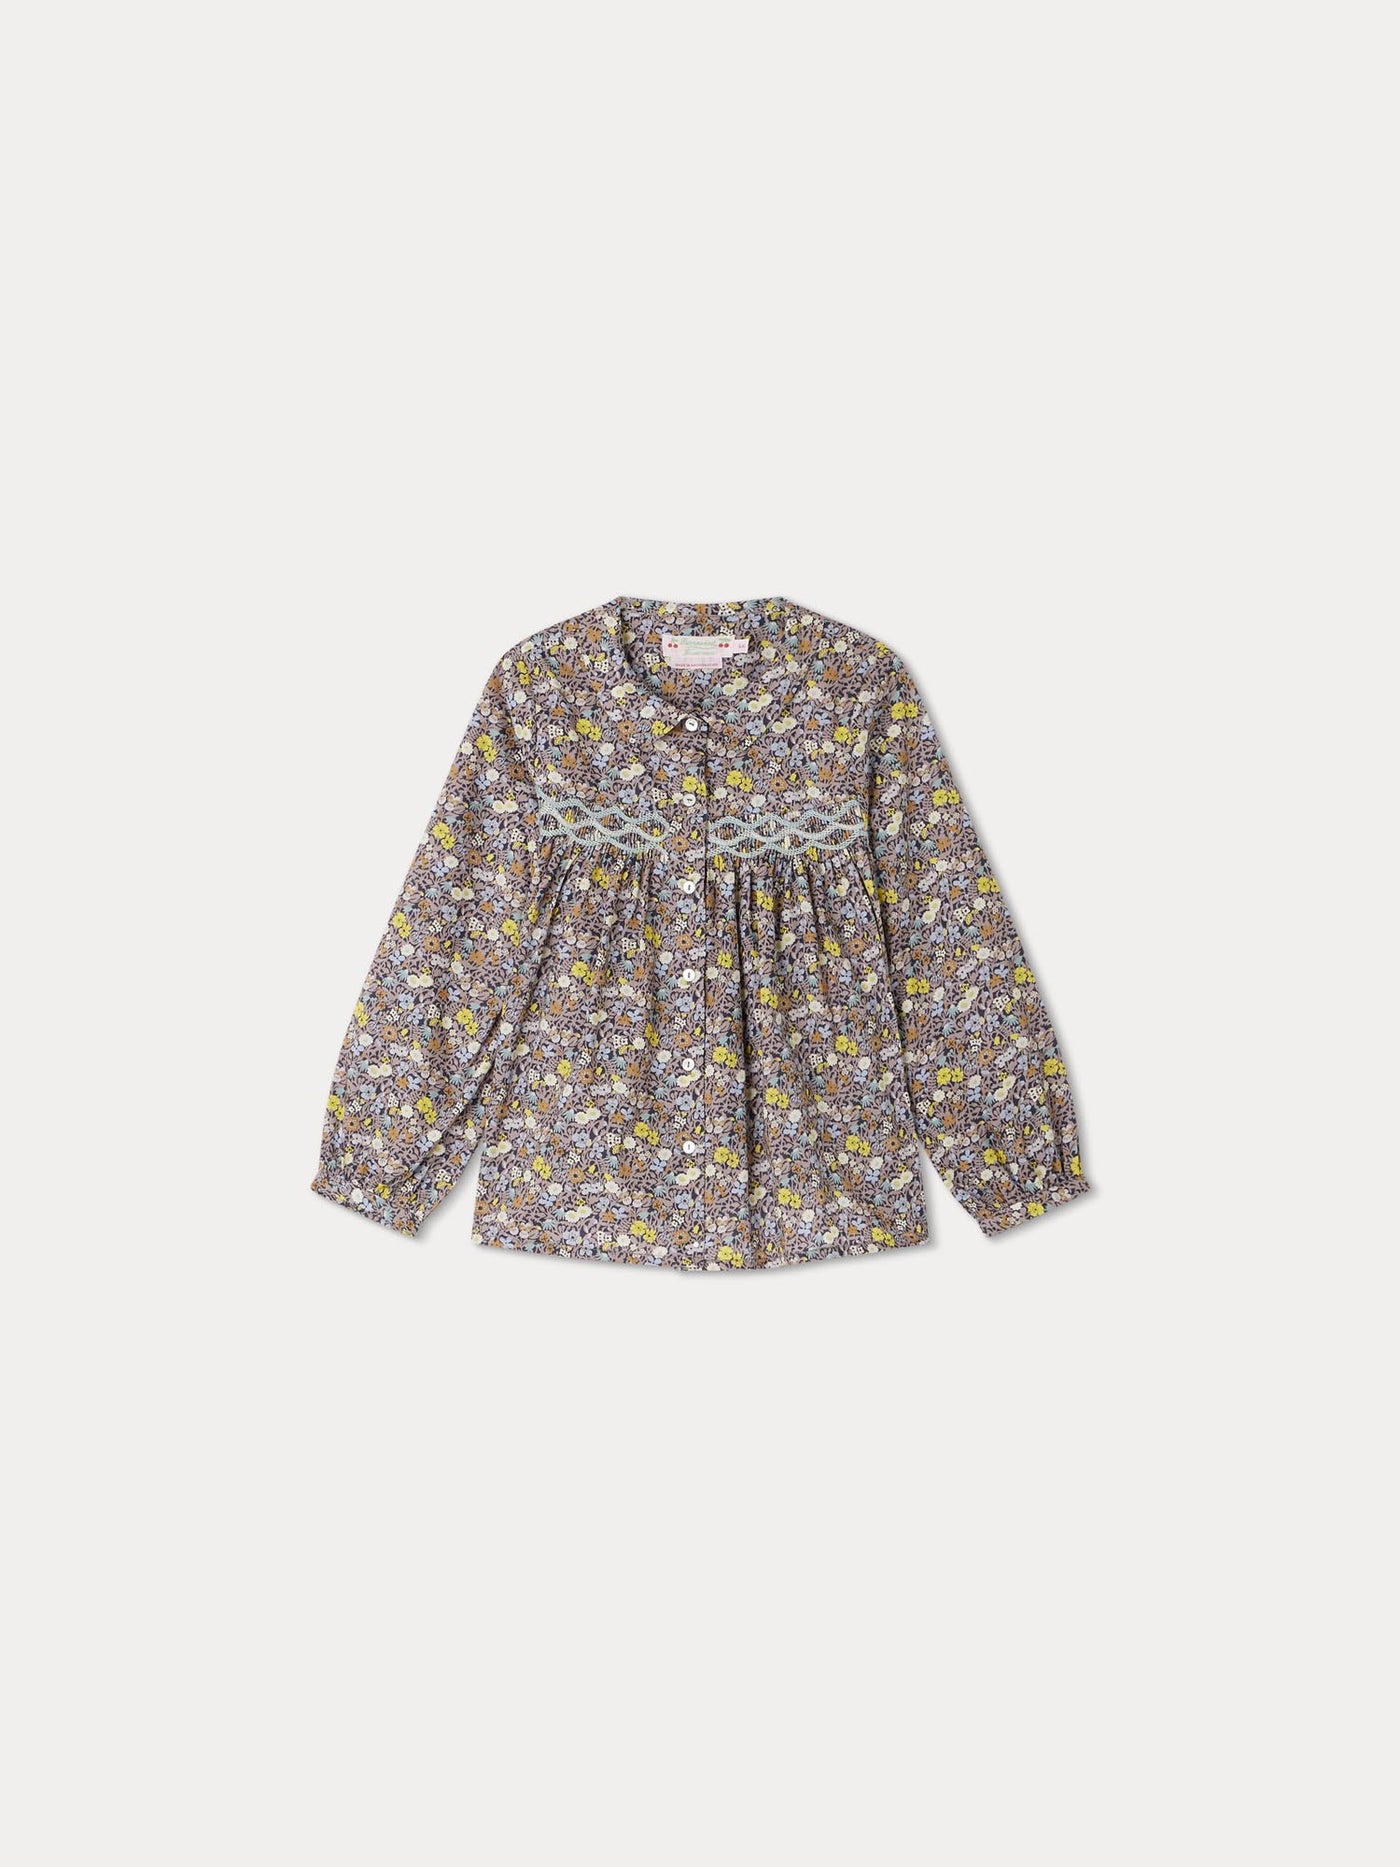 Gwenaelle blouse in Liberty fabric